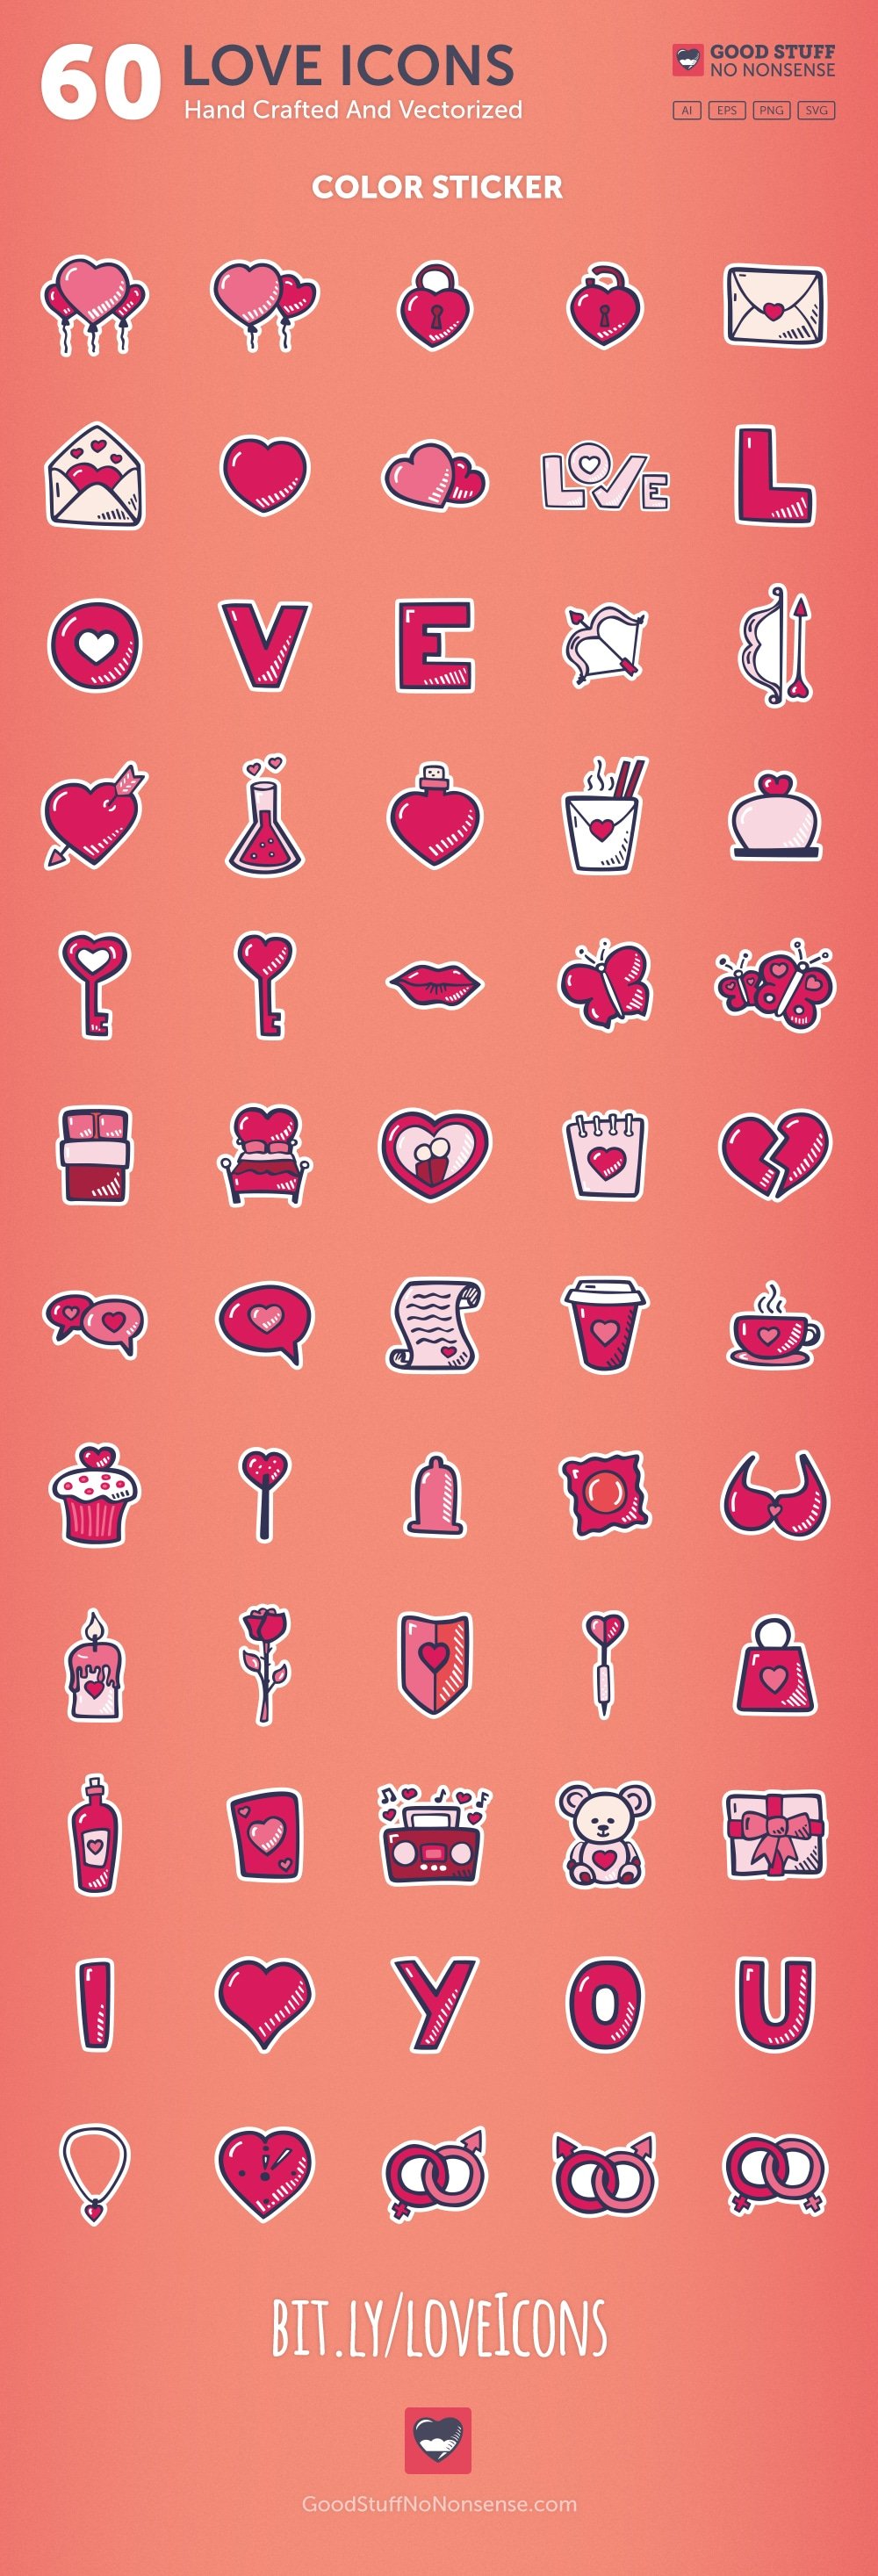 A set of 60 different color sticker white-pink hand drawn icons on a pink background.